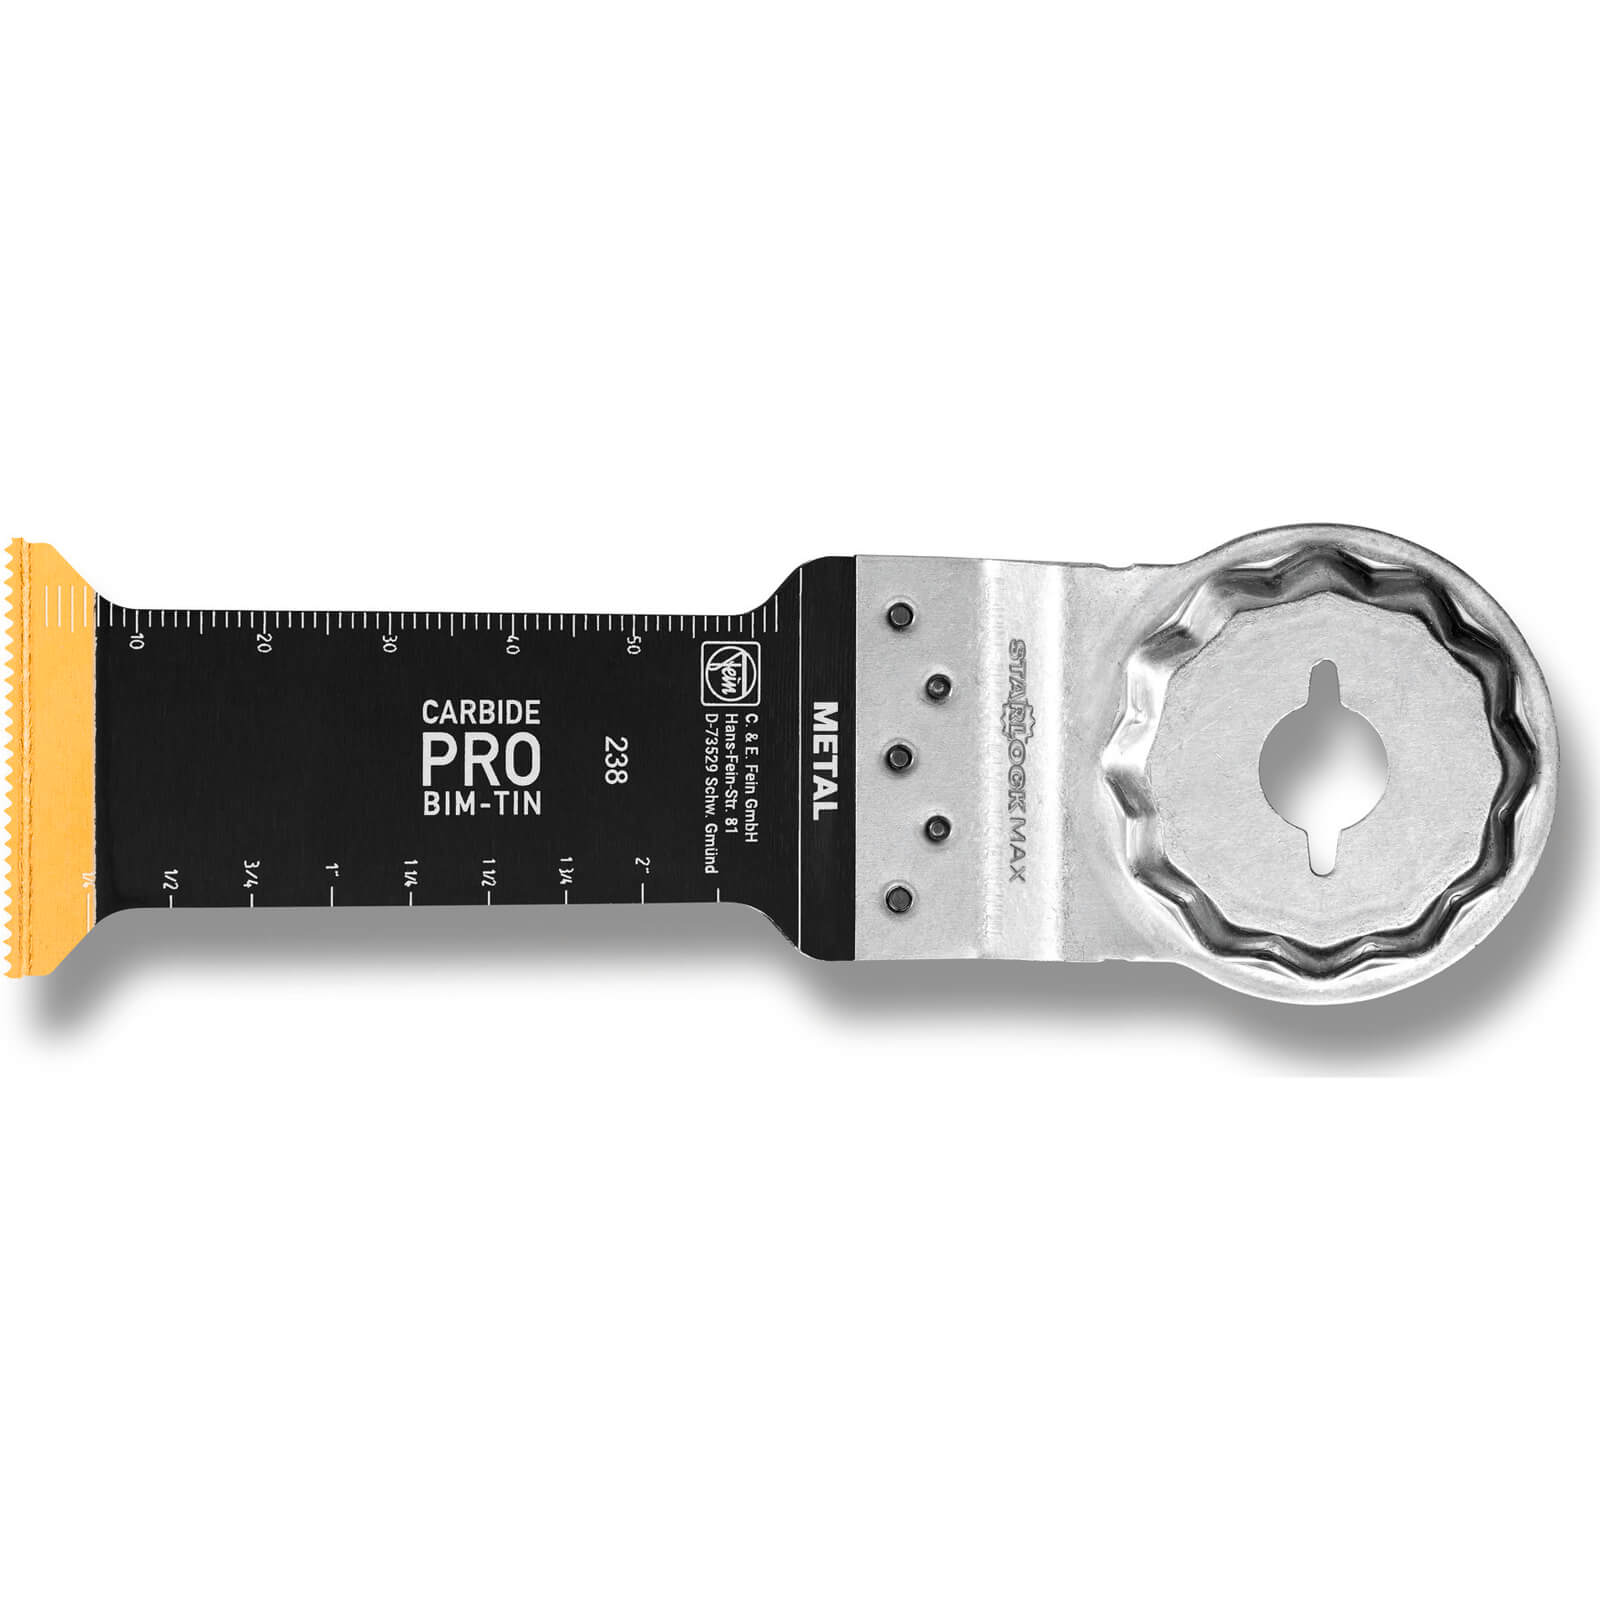 Image of Fein E-Cut Carbide Pro Starlock Max Oscillating Multi Tool Plunge Saw Blade 32mm Pack of 1